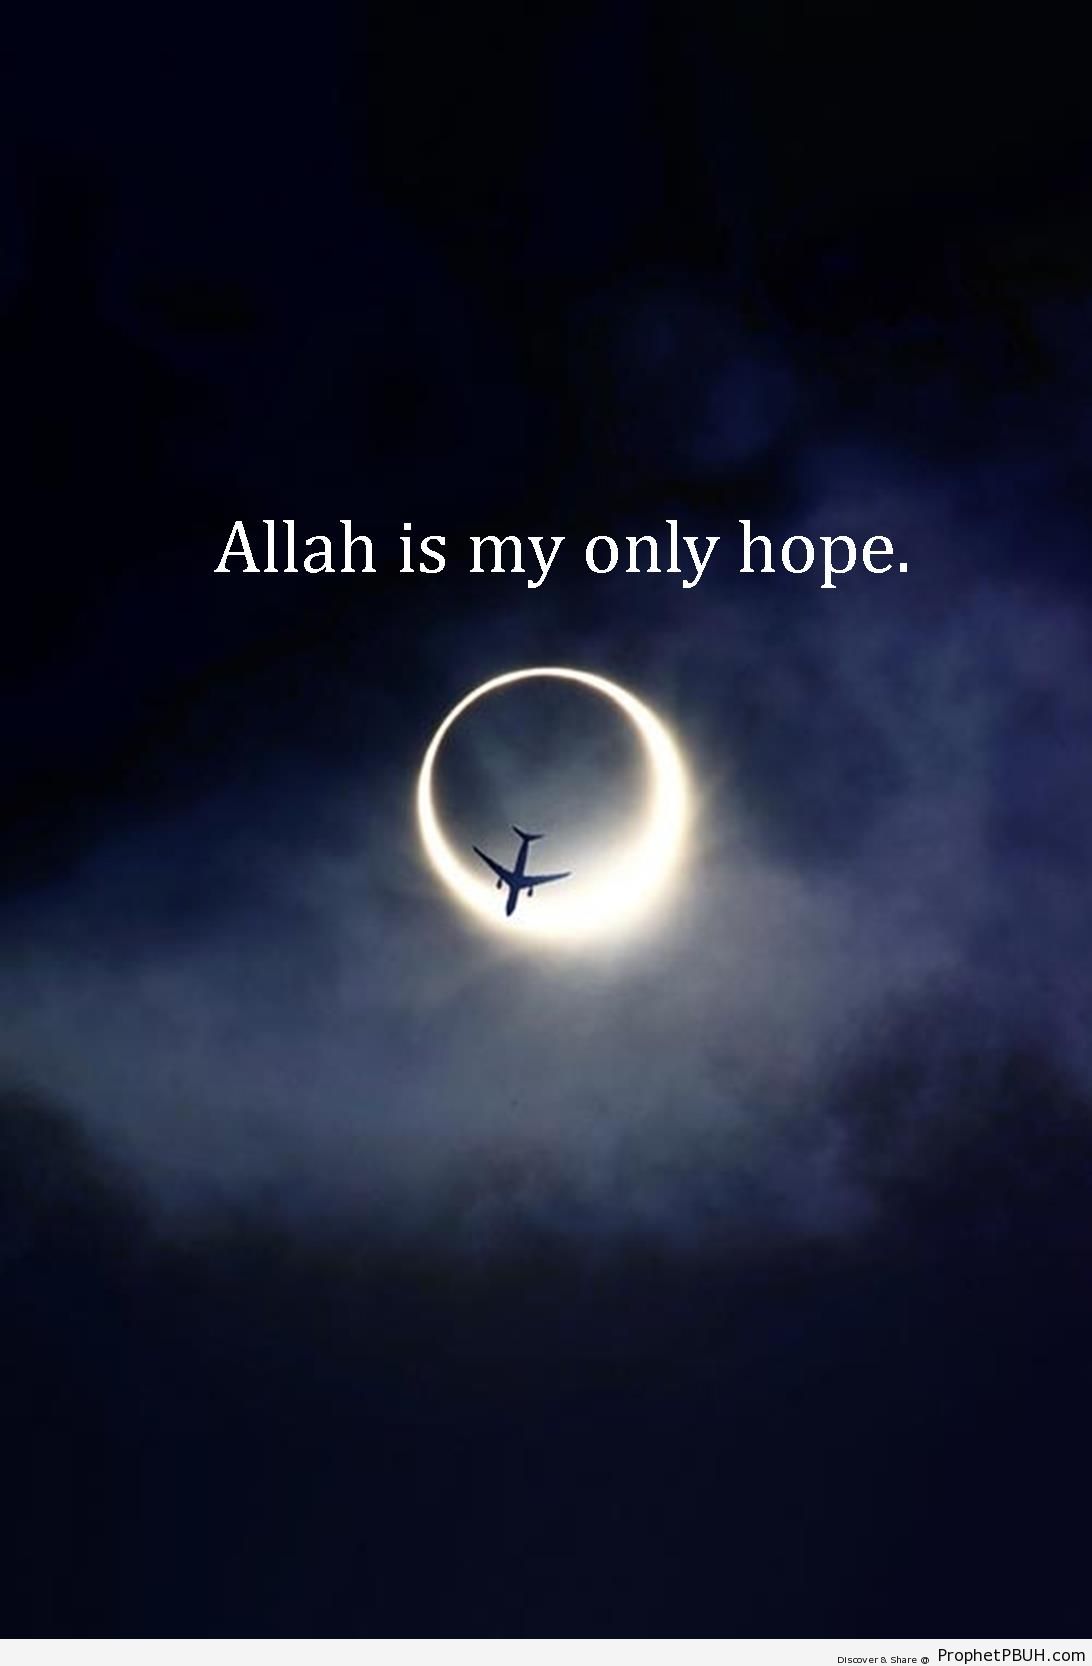 Allah is my only hope - Islamic Posters 